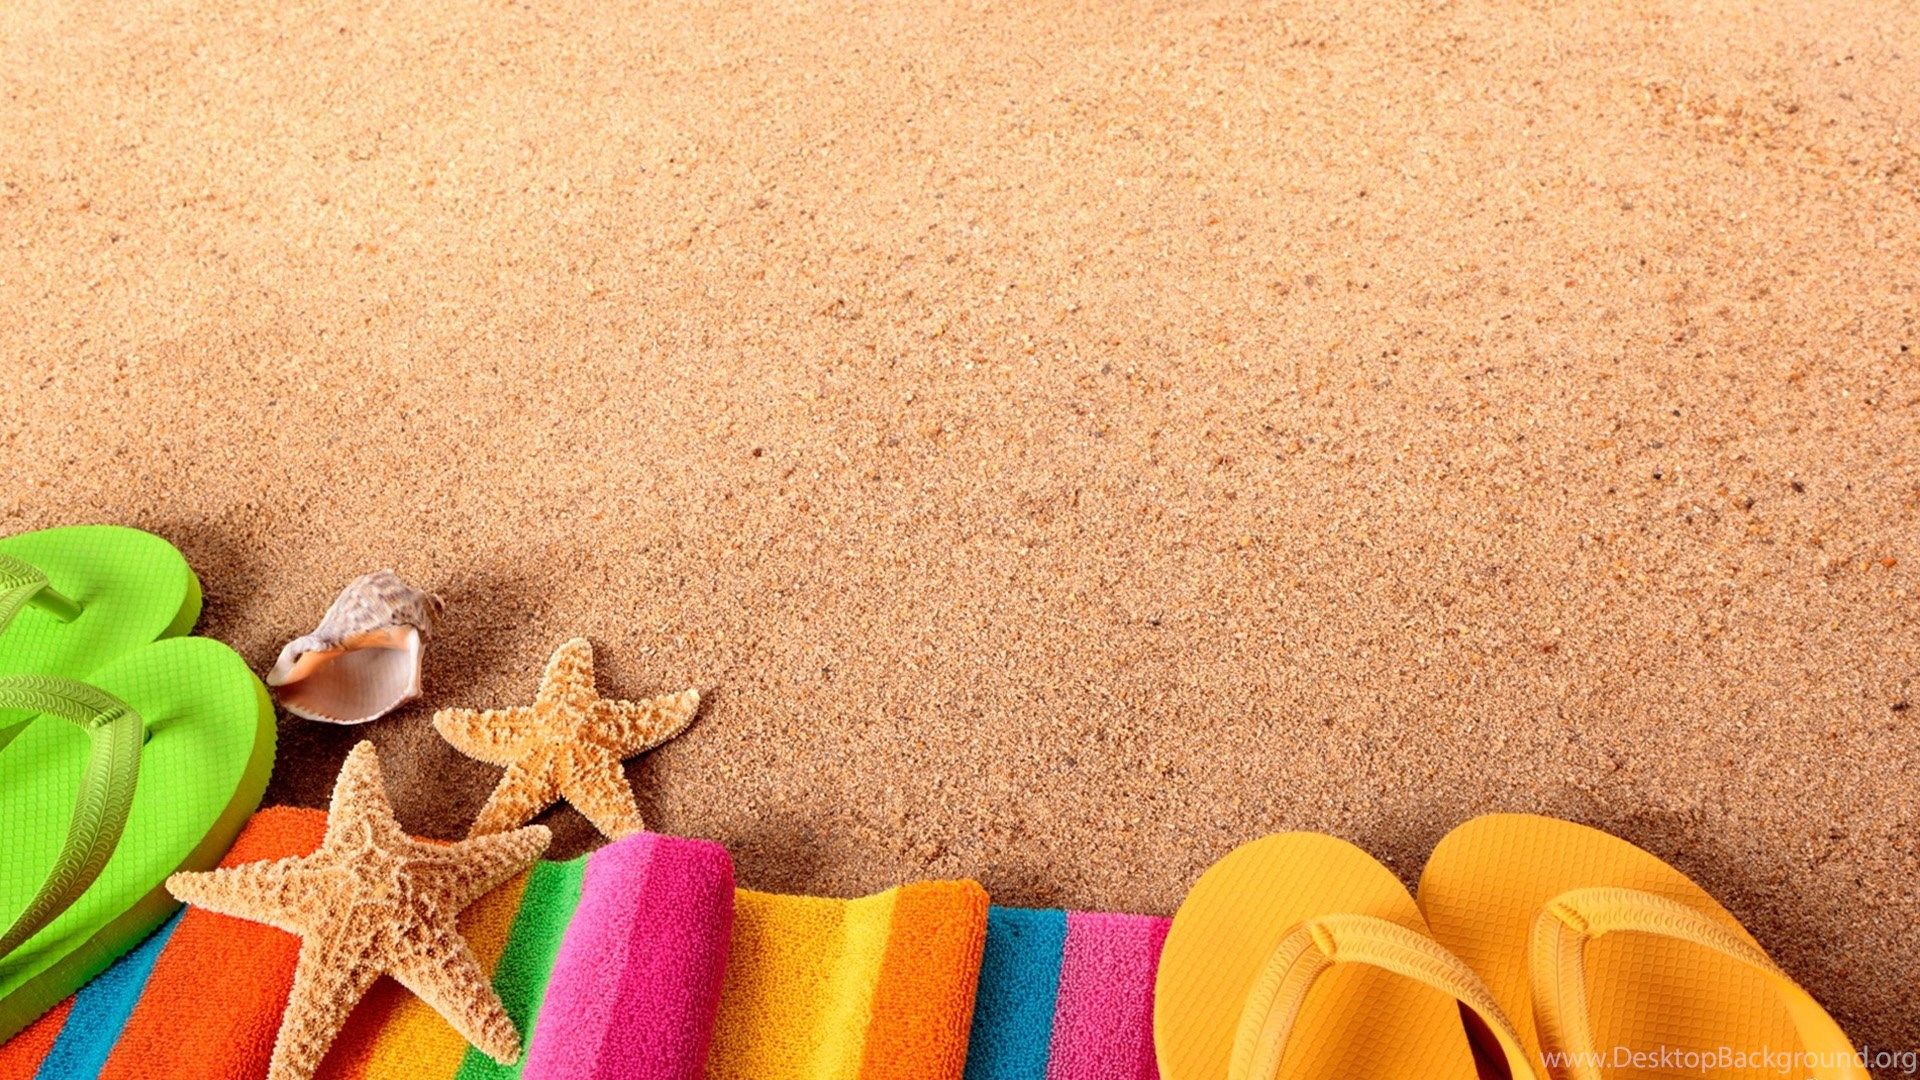 Beach Sandals And Towels Wallpaper, Beach Picture And Image